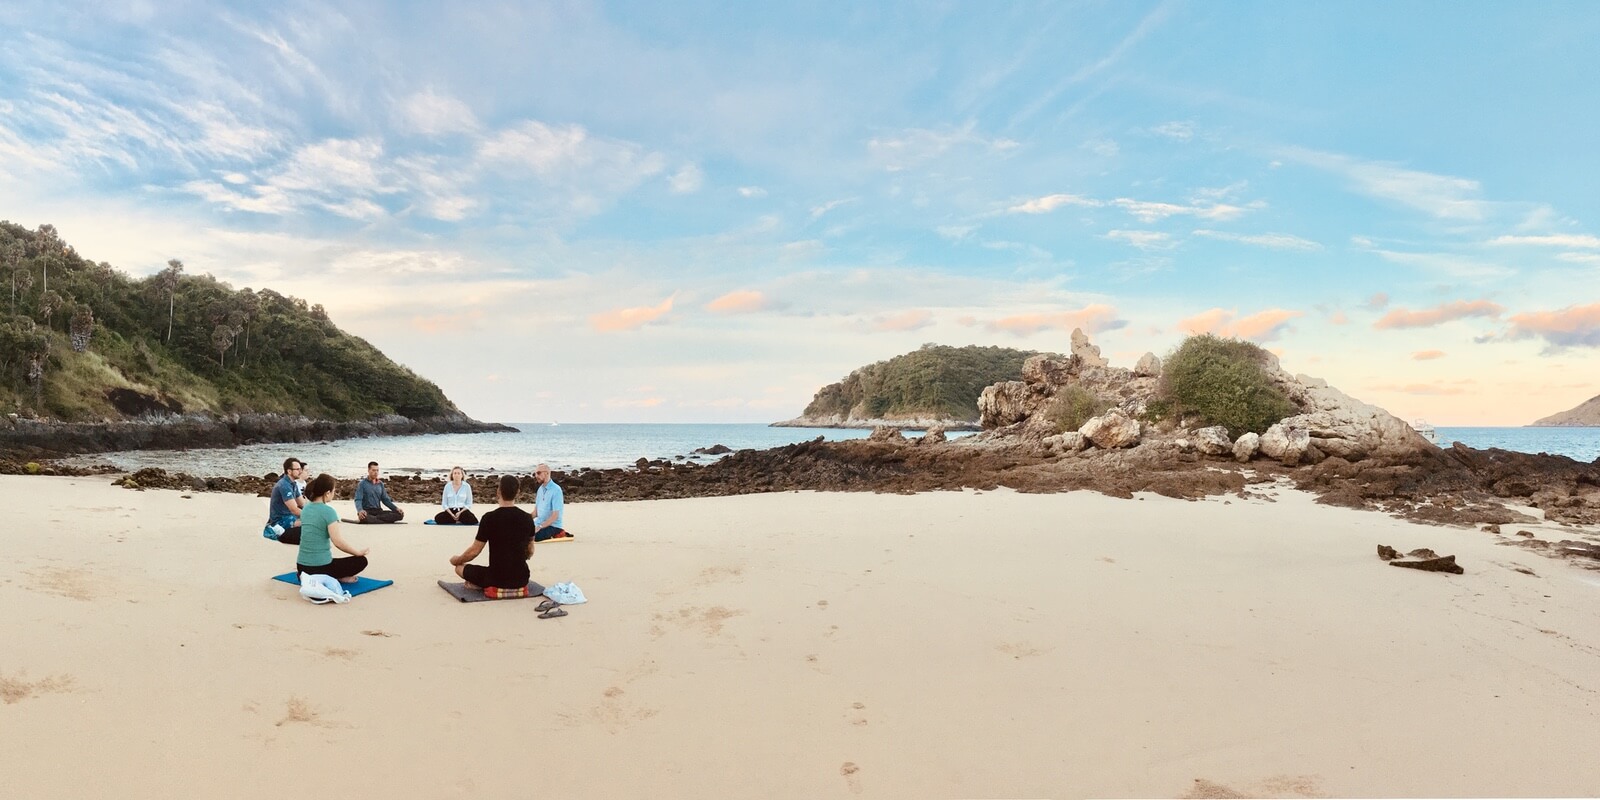 Seven meditators sit on Yanui beach in Phuket together and practice mindfulness.